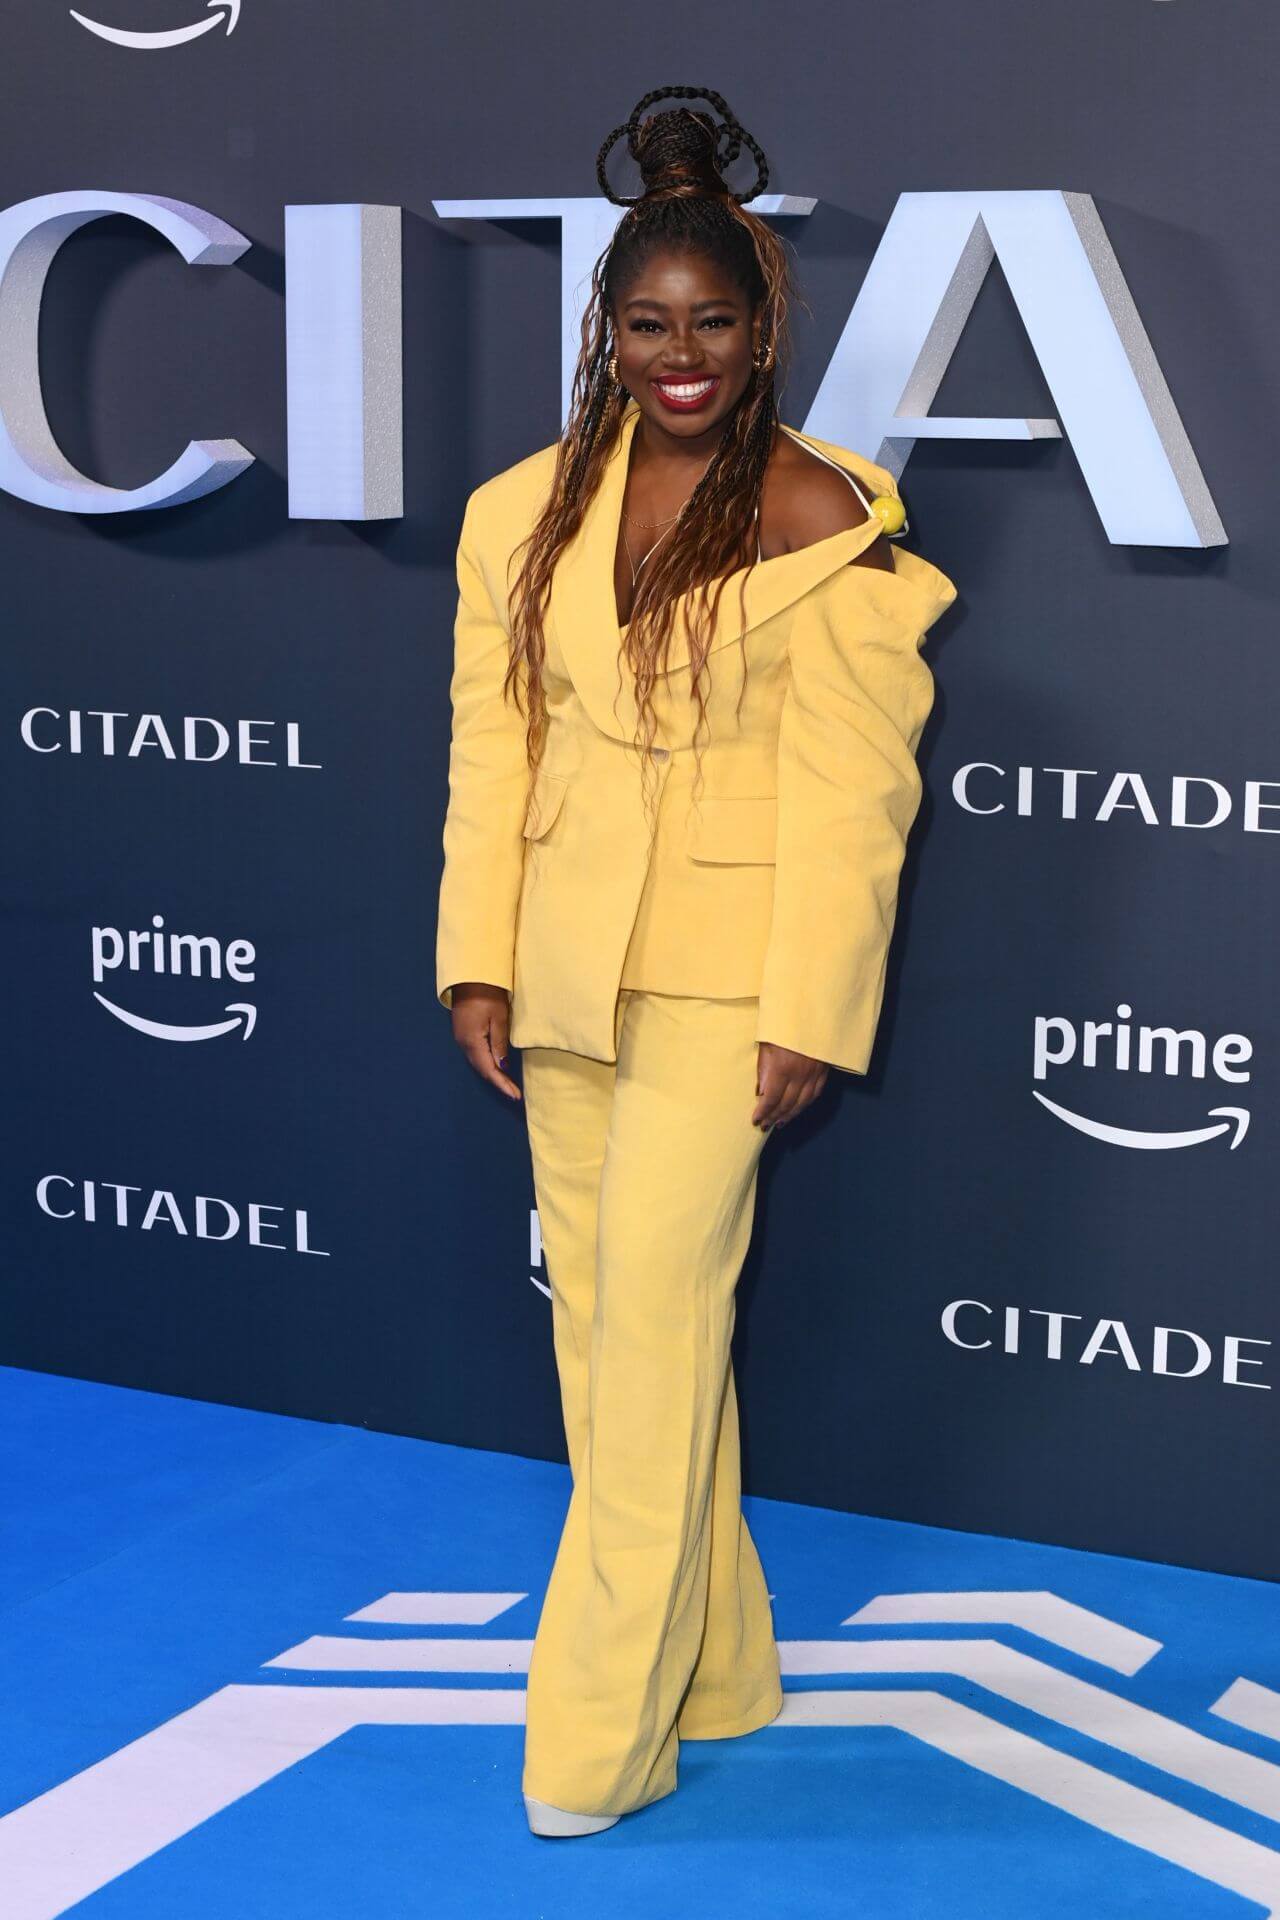 Clara Amfo In Yellow Blazer With Pants At “Citadel” Premiere in London